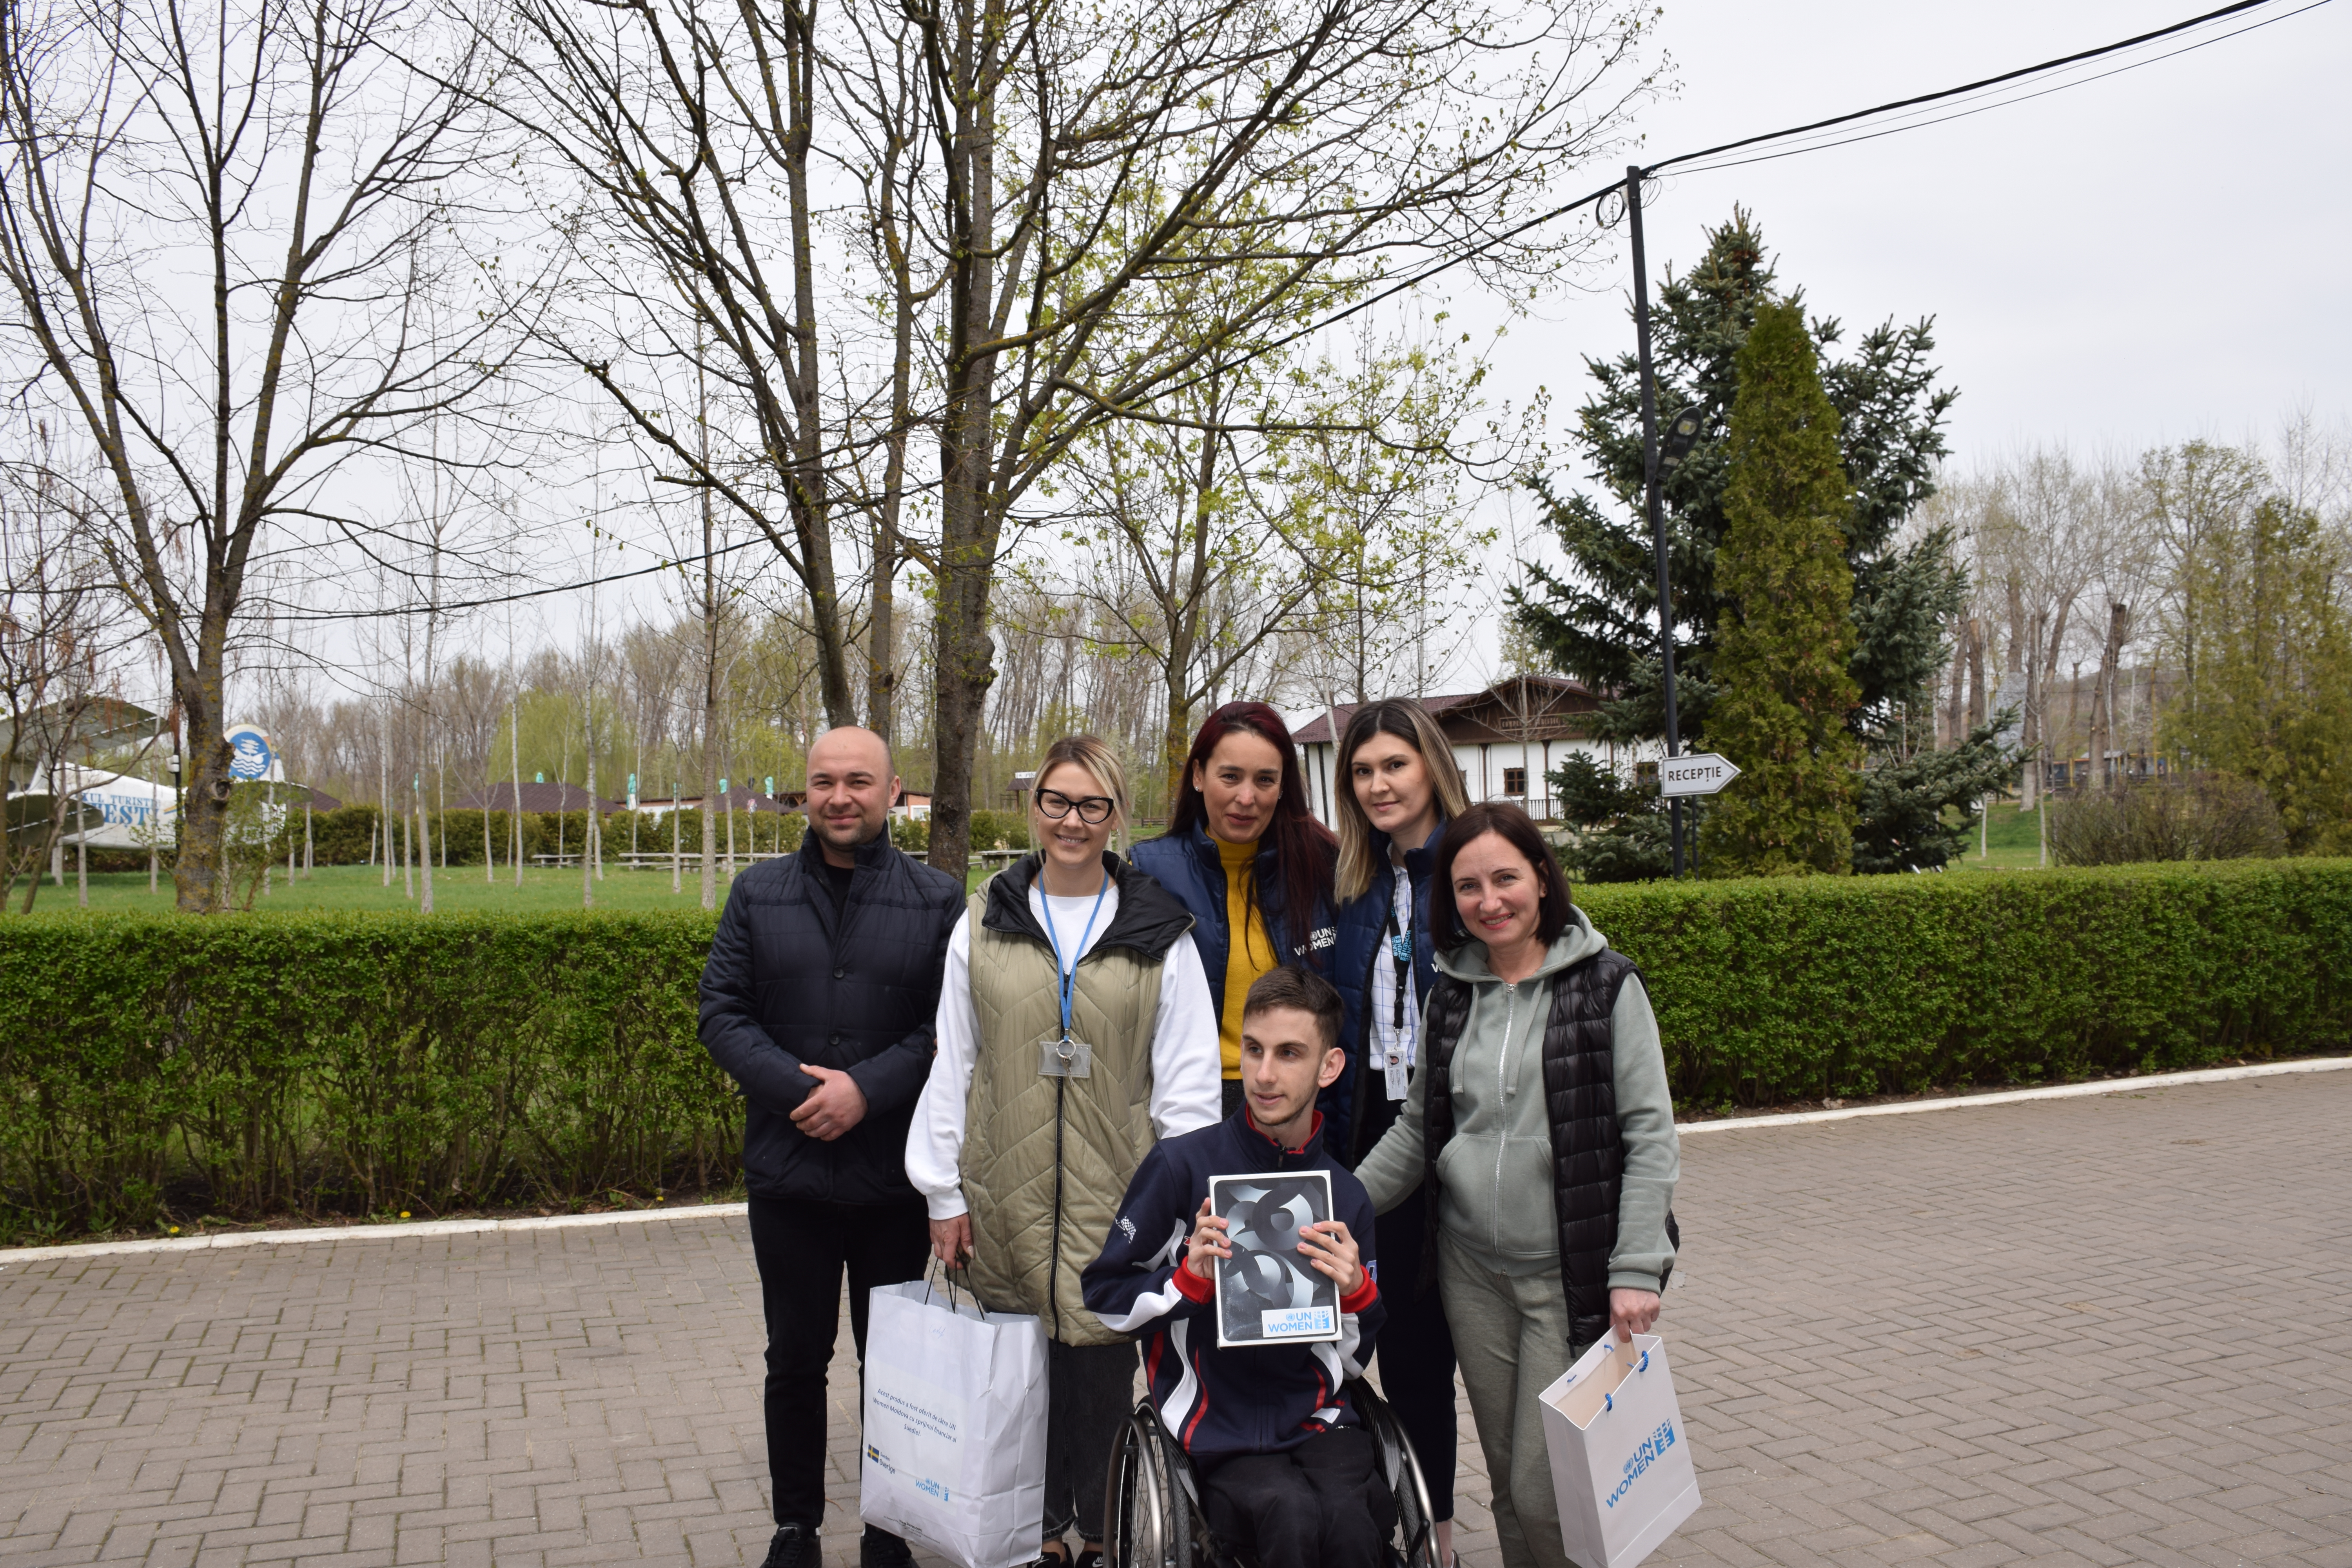 Yaroslav (at the center) with his mother (at his left). From left to right, Gheorghe Diaconu, administrator of the temporary placement center in Costesti together with Veronica, his sister, Nighina Aziziov and Tatiana Ciobanu, UN Women Moldova. Photo: UN Women Moldova.